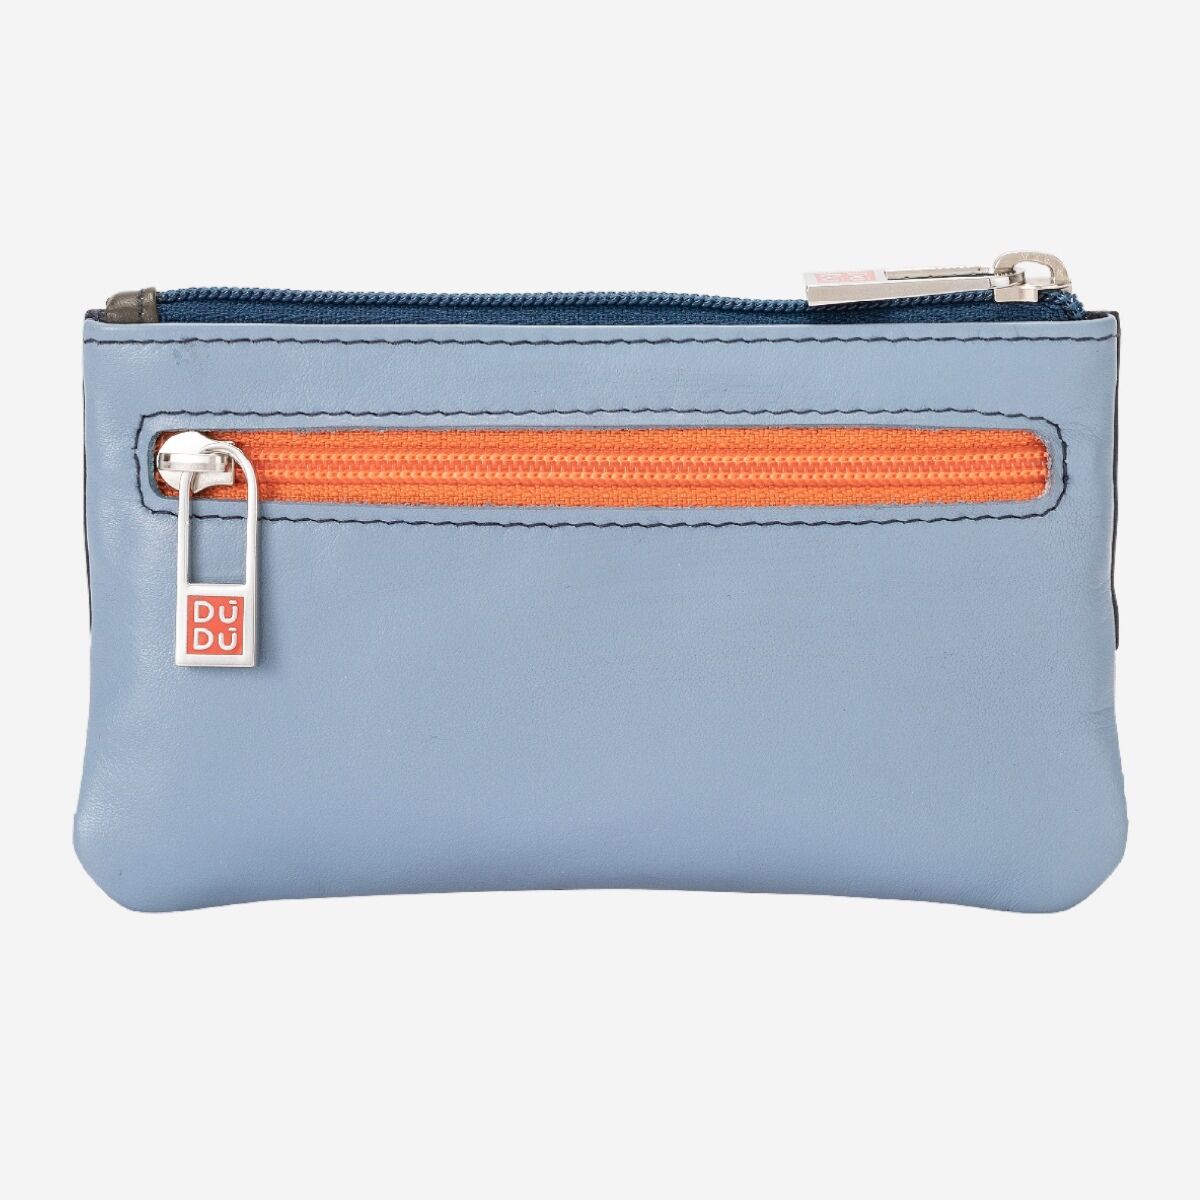 NUVOLA PELLE Leather Coin Purse - Blue/Red